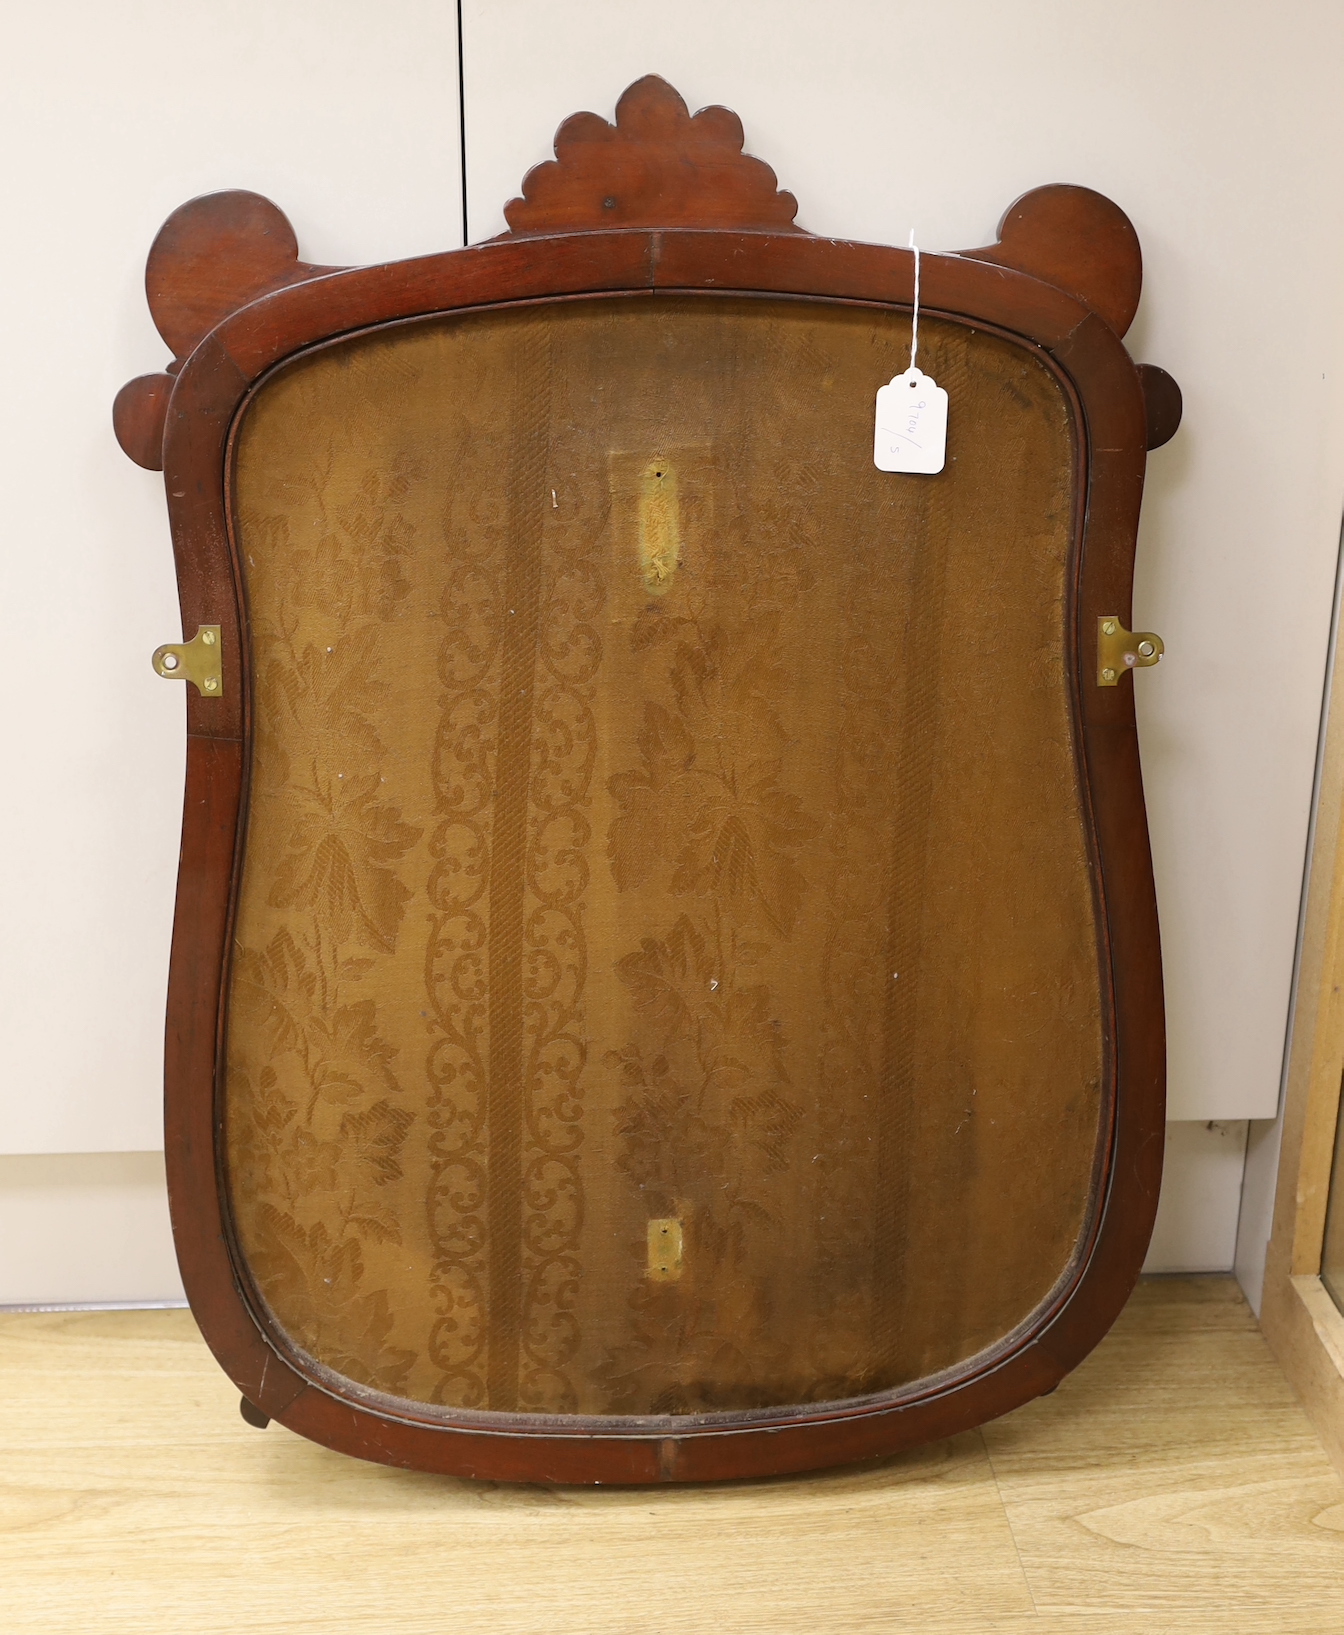 A Victorian petite point embroidered panel, in shield shaped mahogany frame (ex pole screen), 80cm - Image 2 of 2